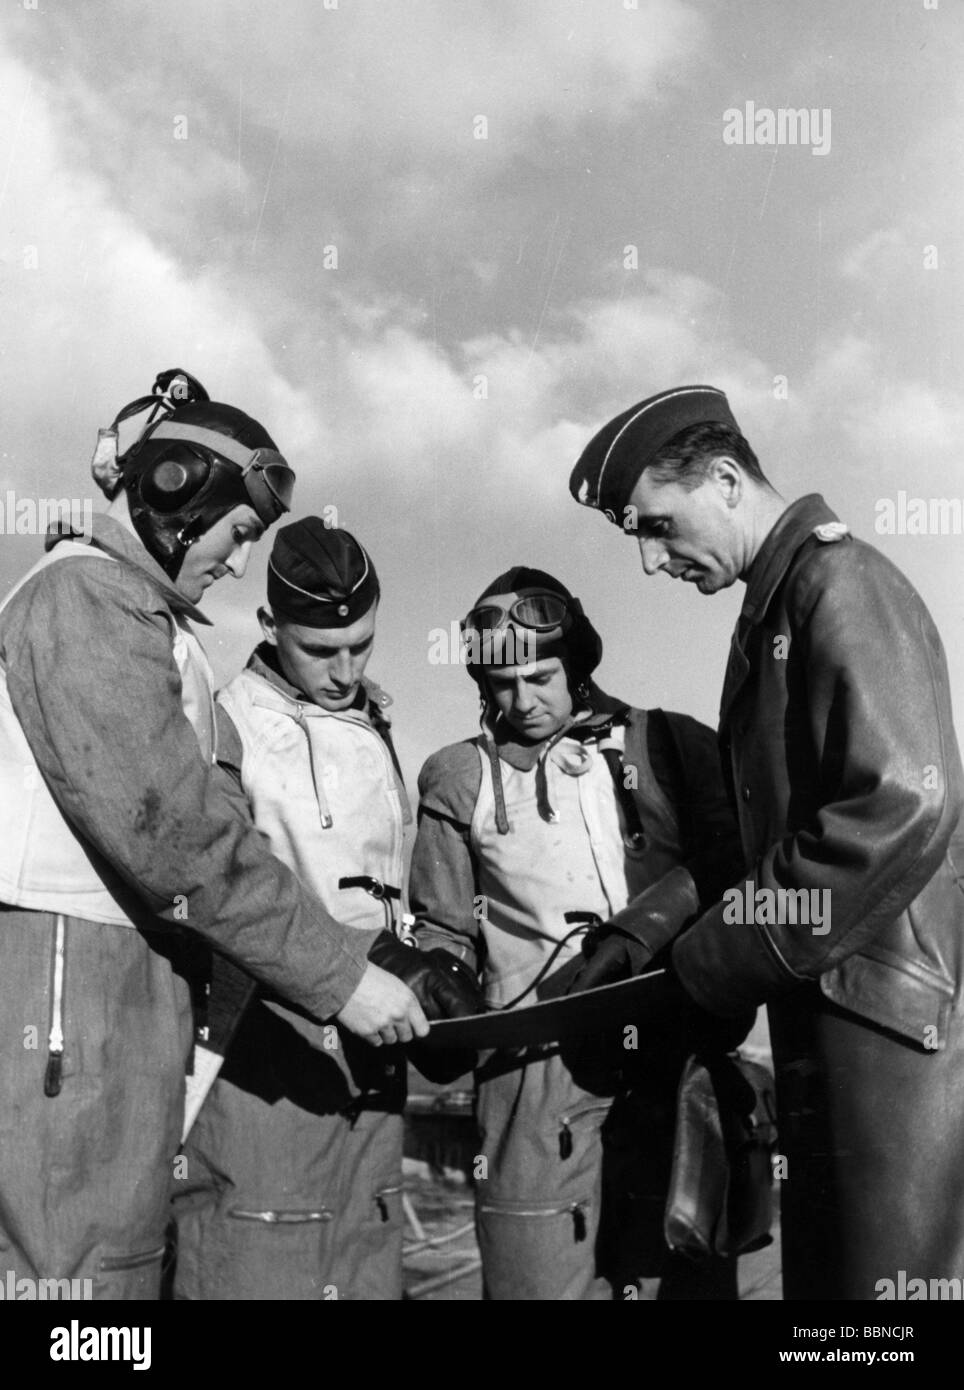 events, Second World War / WWII, aerial warfare, persons, Luftwaffe squadron leader giving last instructions before a mission, circa 1940, Stock Photo